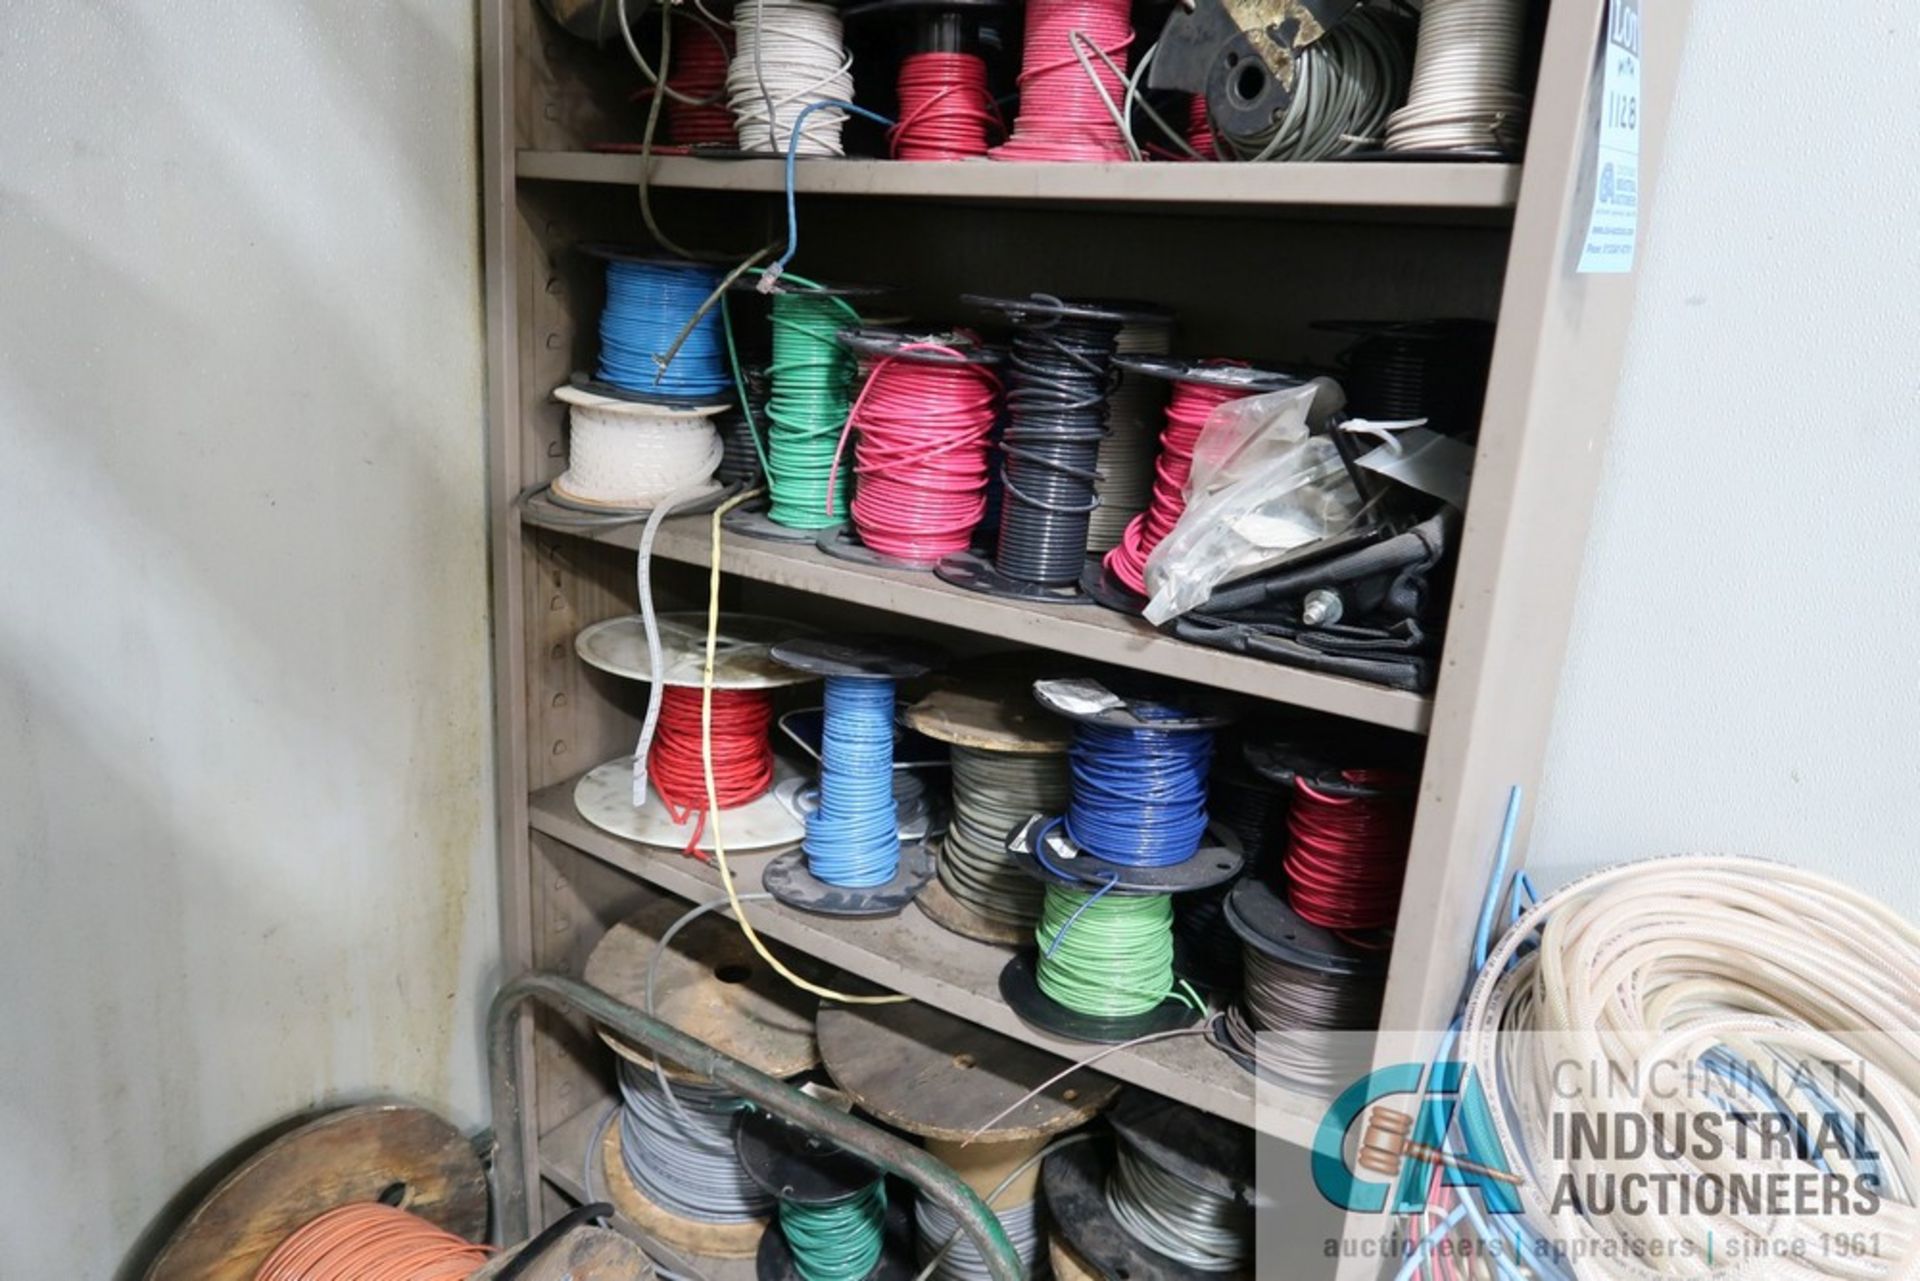 (LOT) MISCELLANEOUS ELECTRICAL WIRE WITH CART AND SHELVING - Image 3 of 5